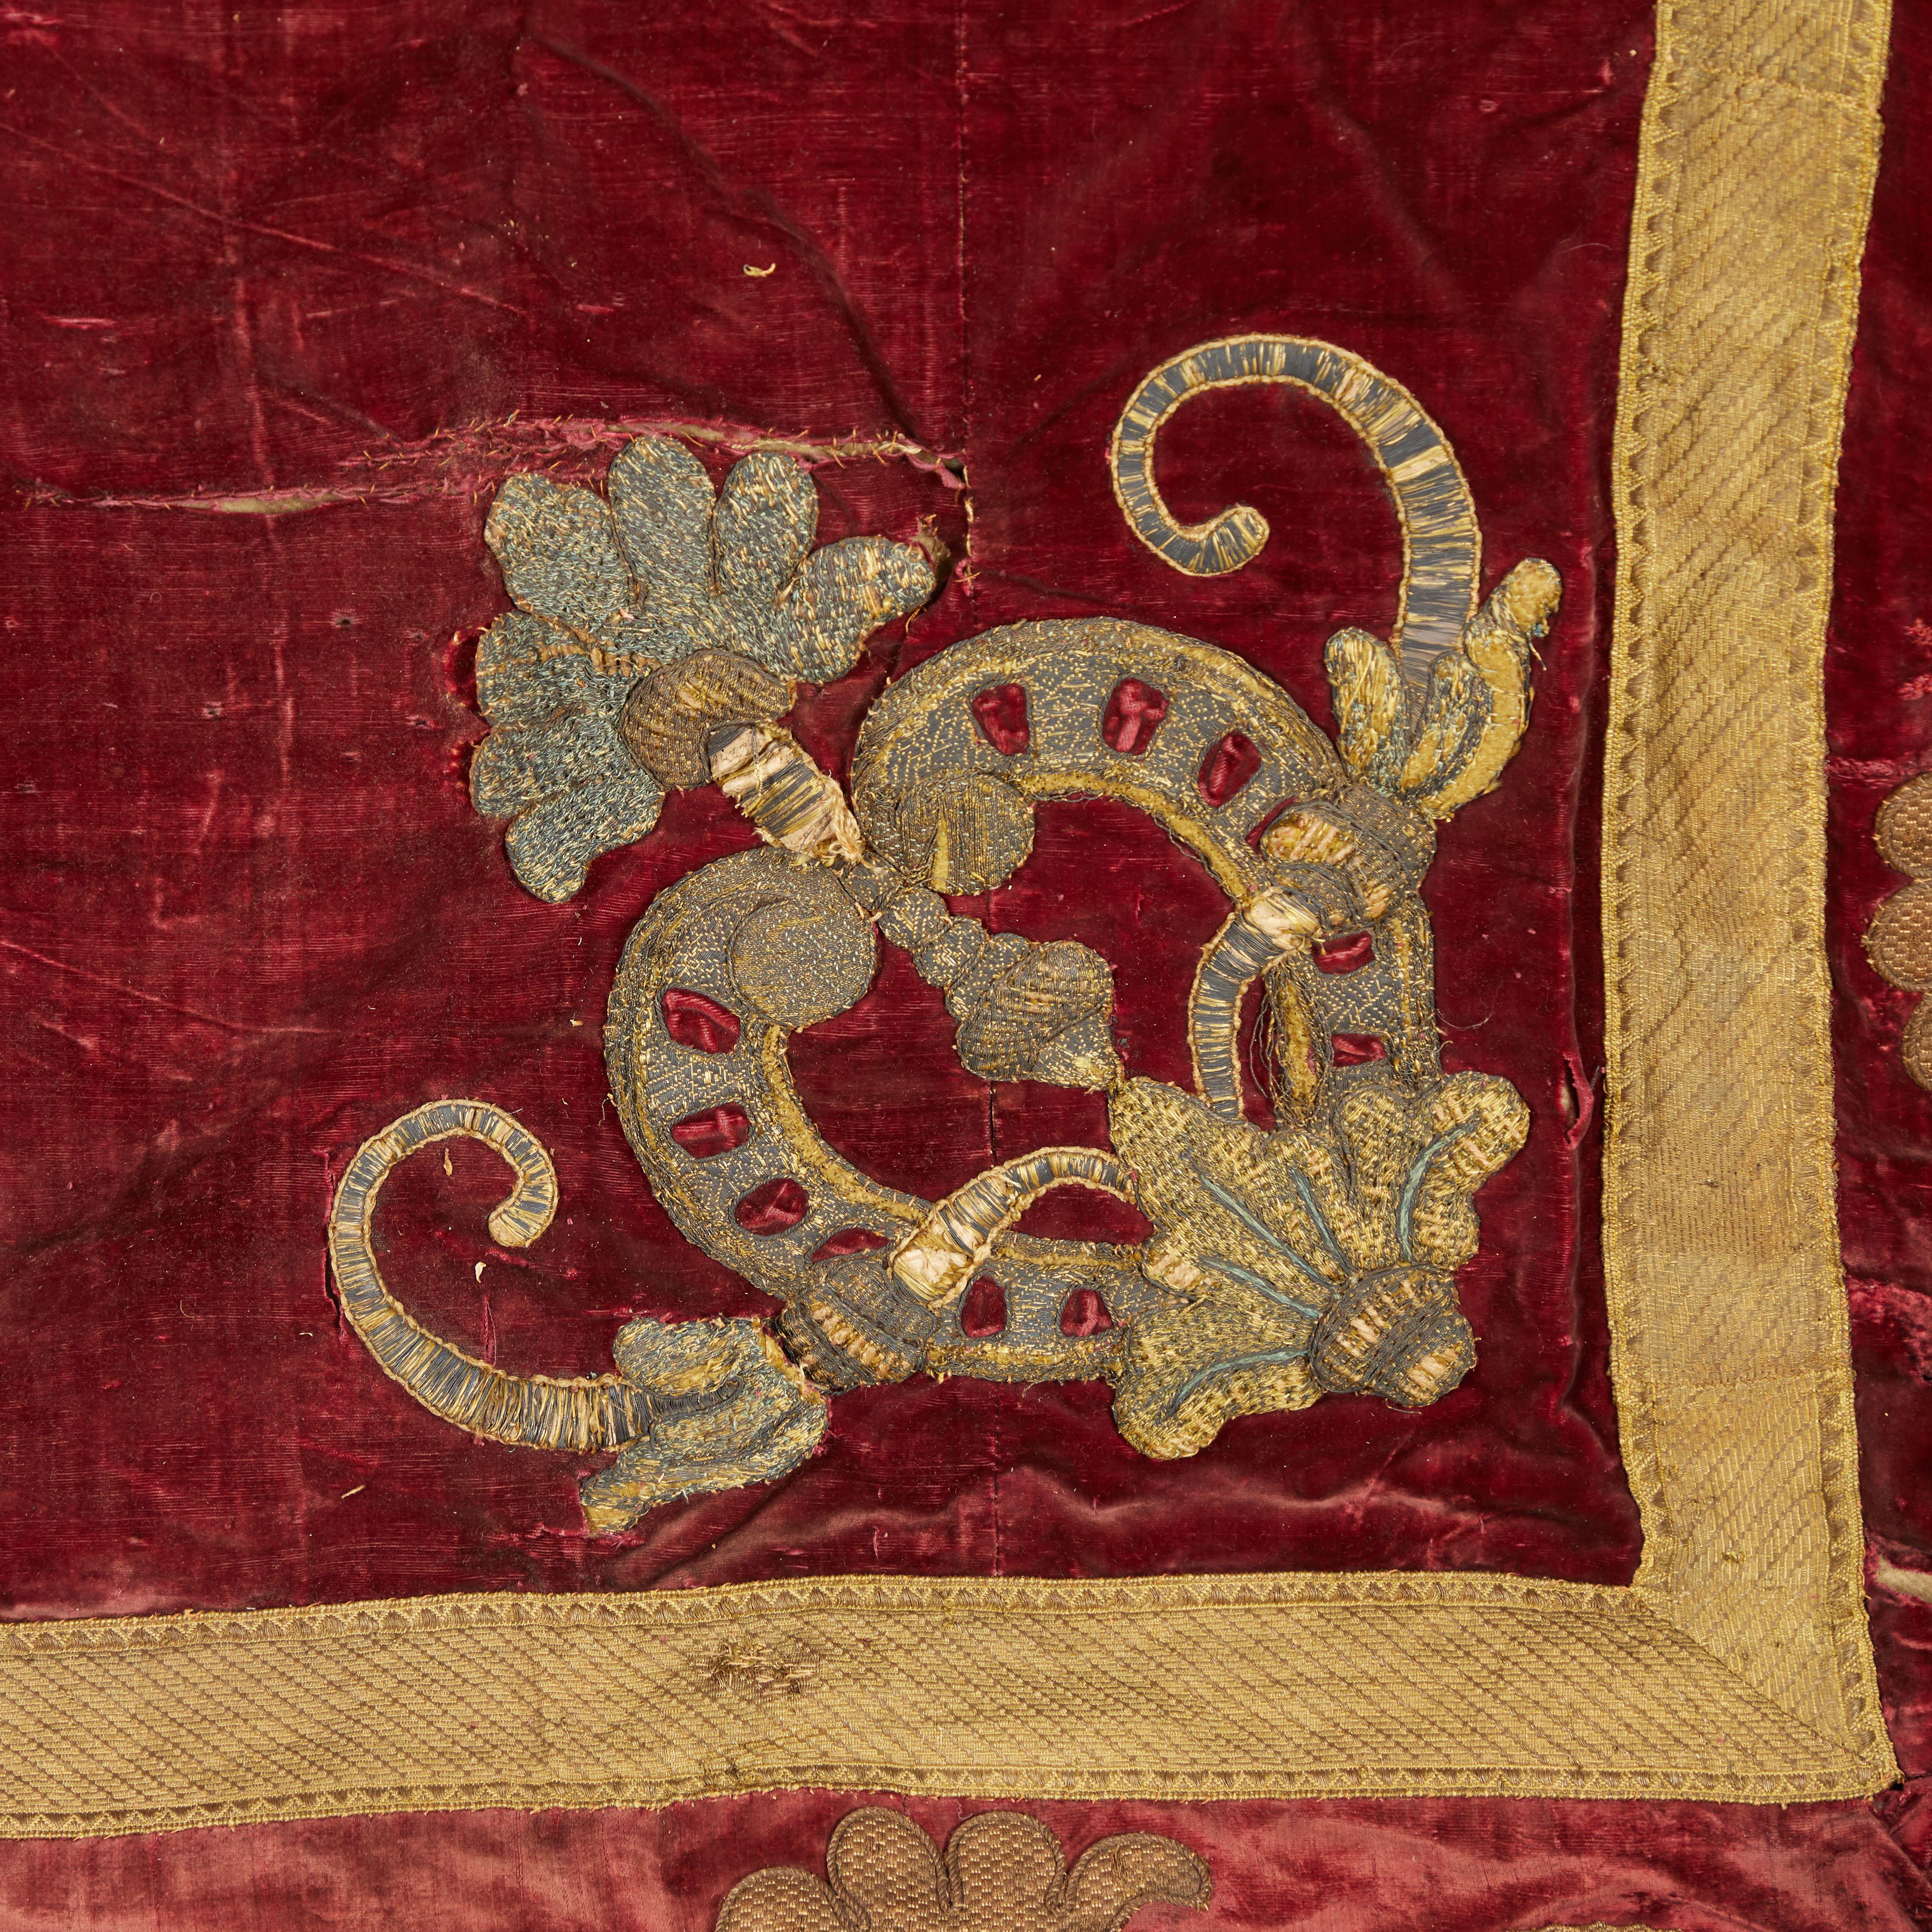 Baroque Early 18th Century Red Velvet Venetian Tapestry Embroidered in Gold Trim